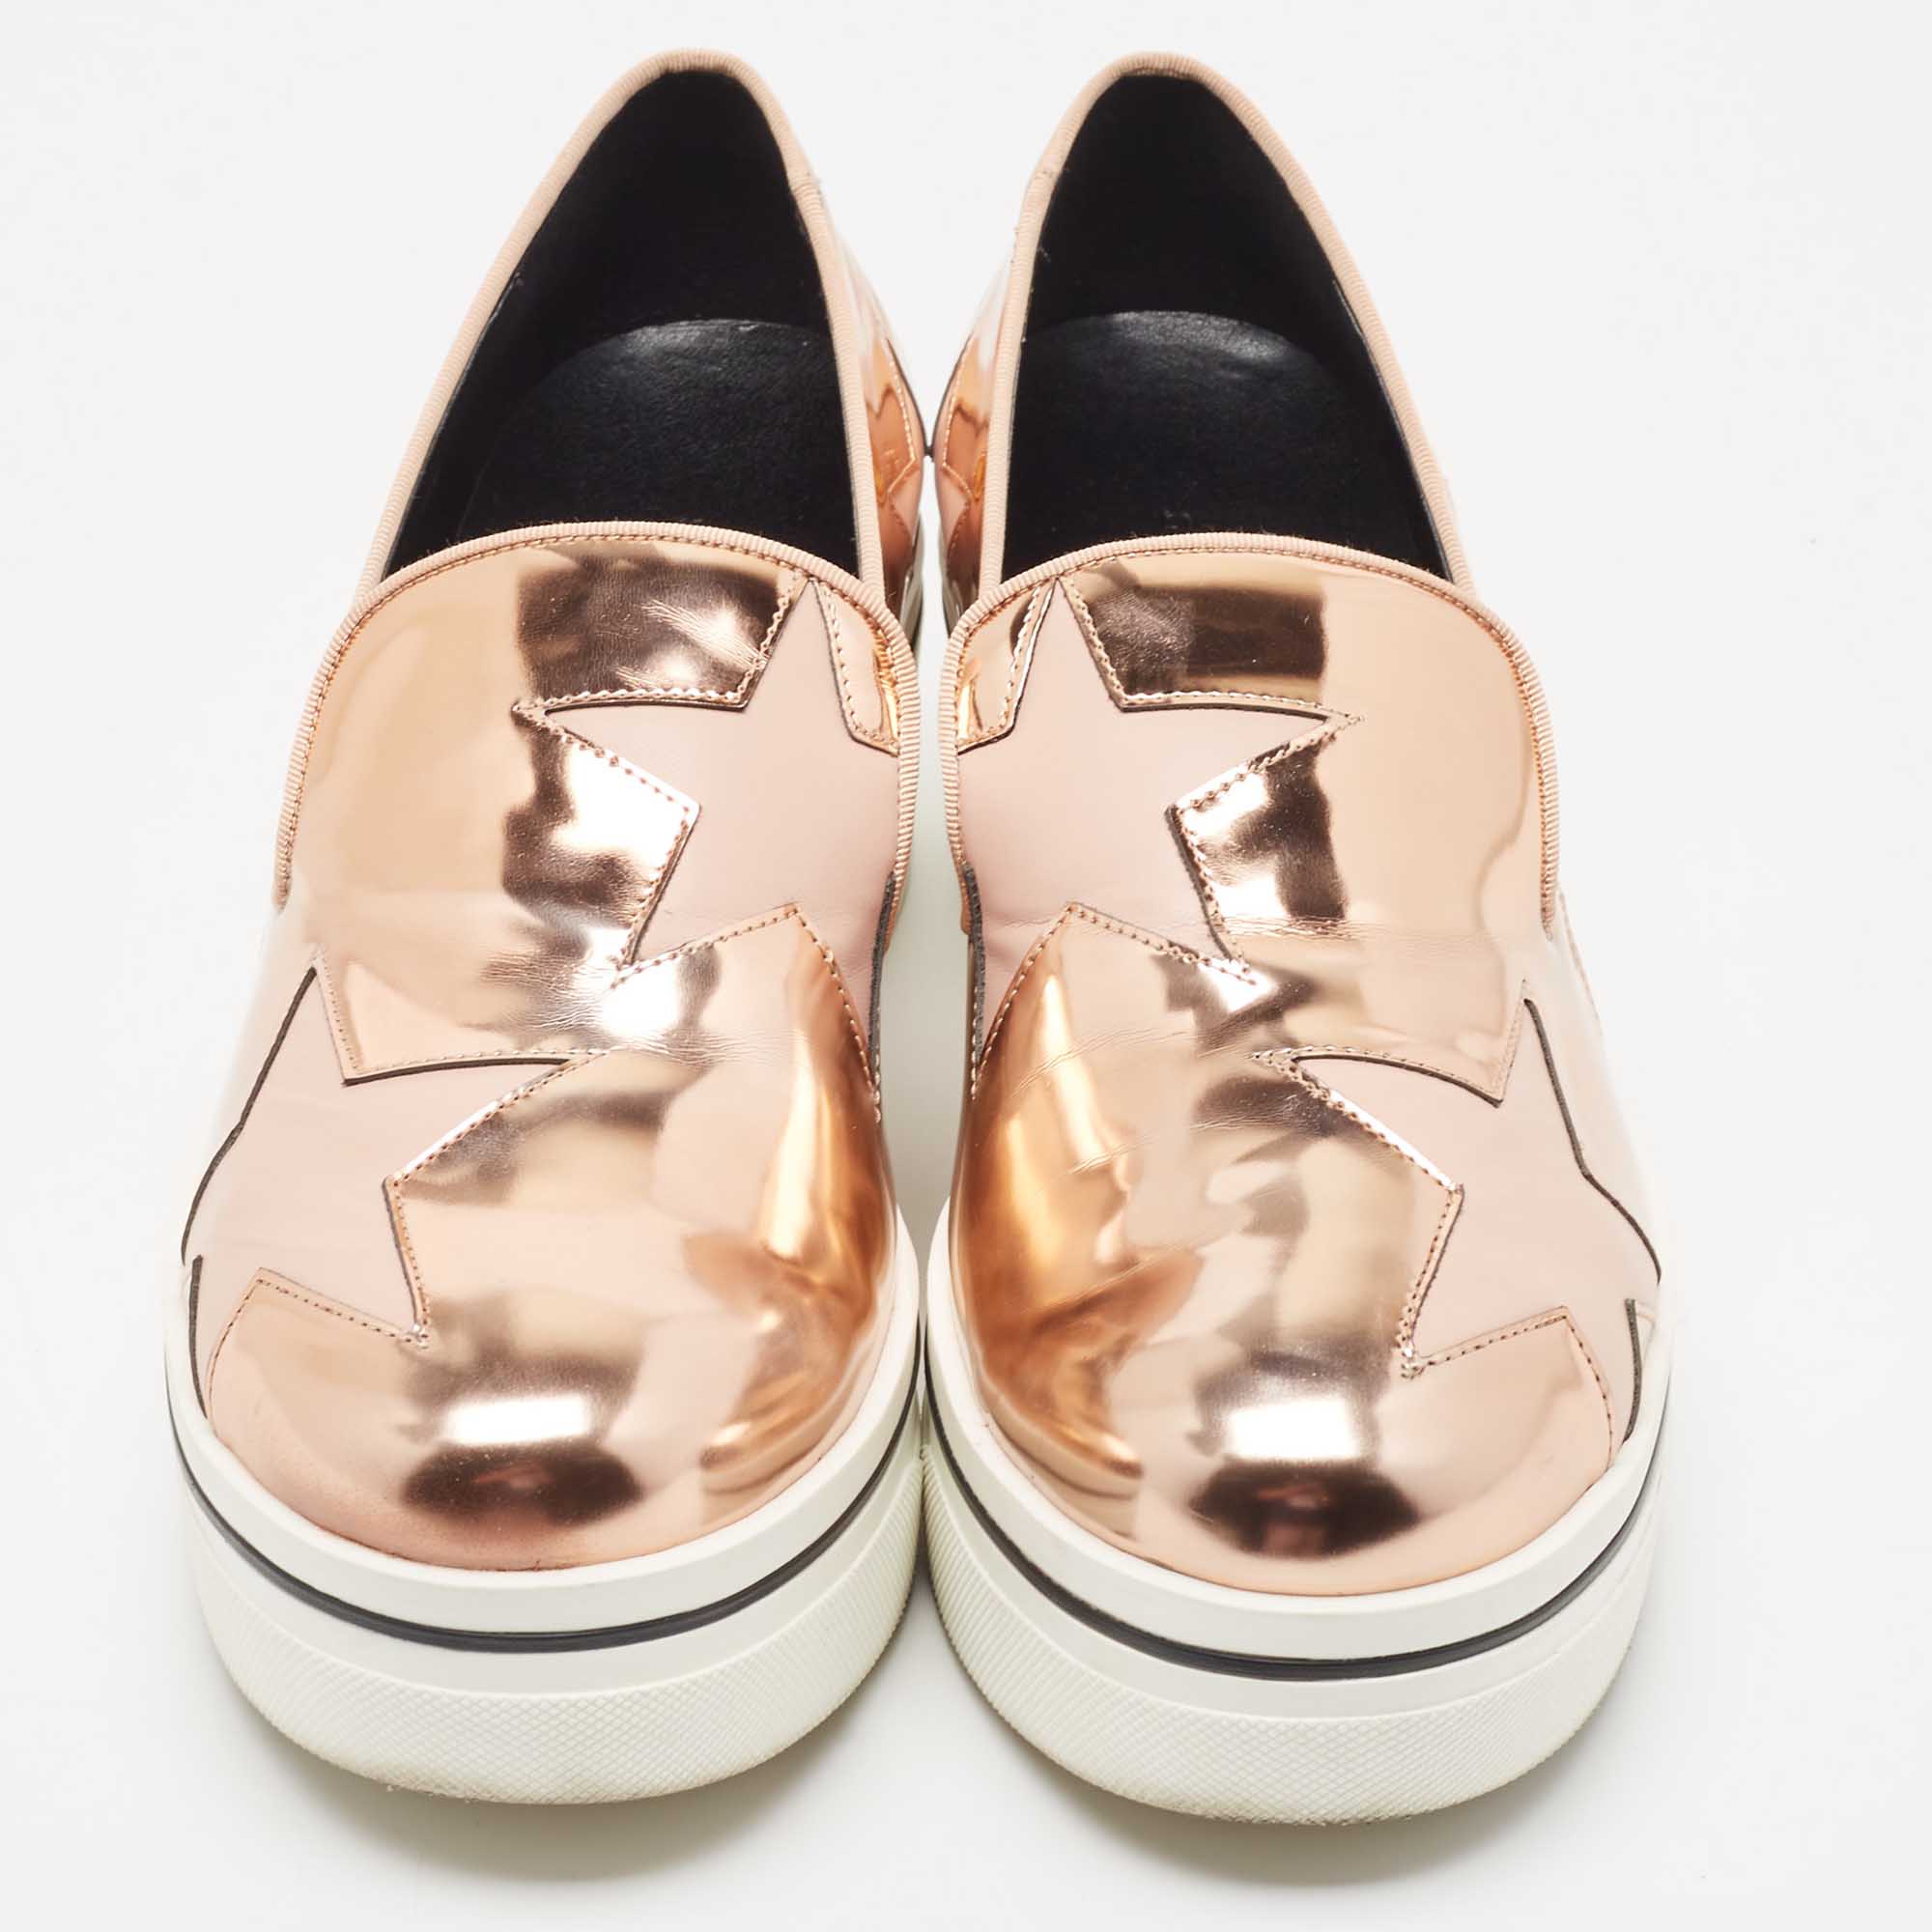 Stella McCartney Rose Gold Faux Leather Binx Star Sneakers Size 39